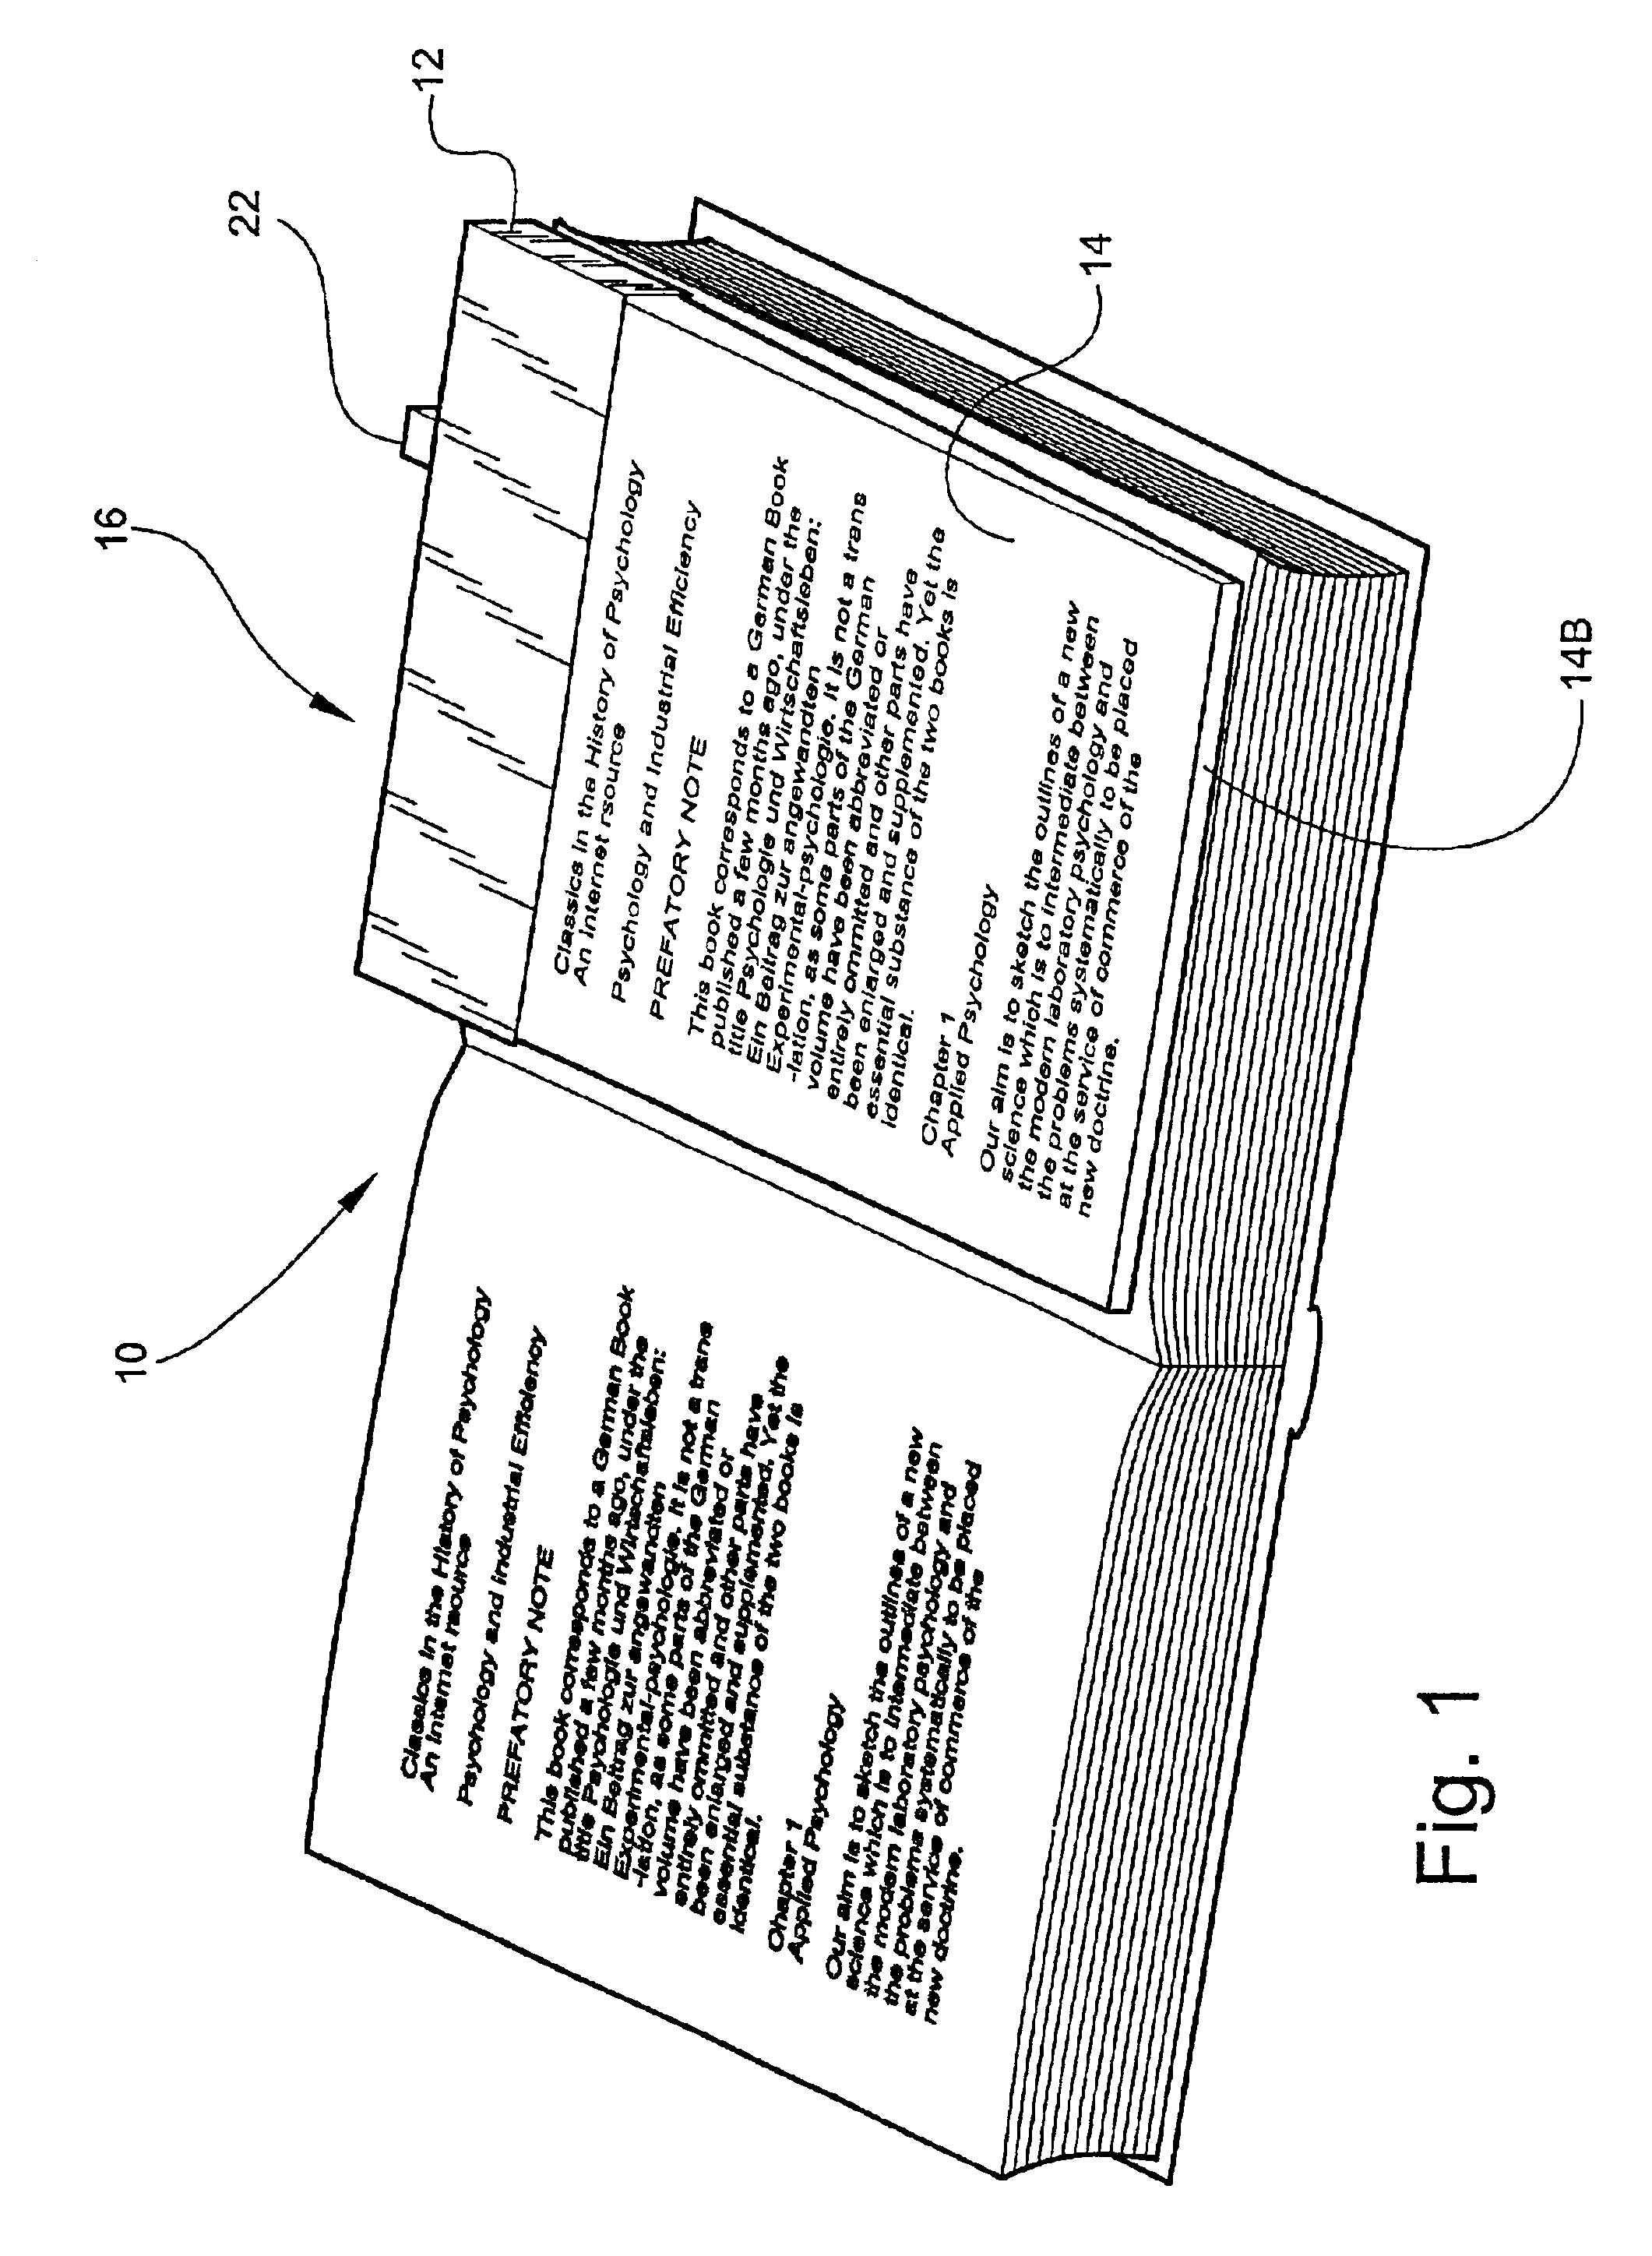 Device for illuminating a generally flat surface